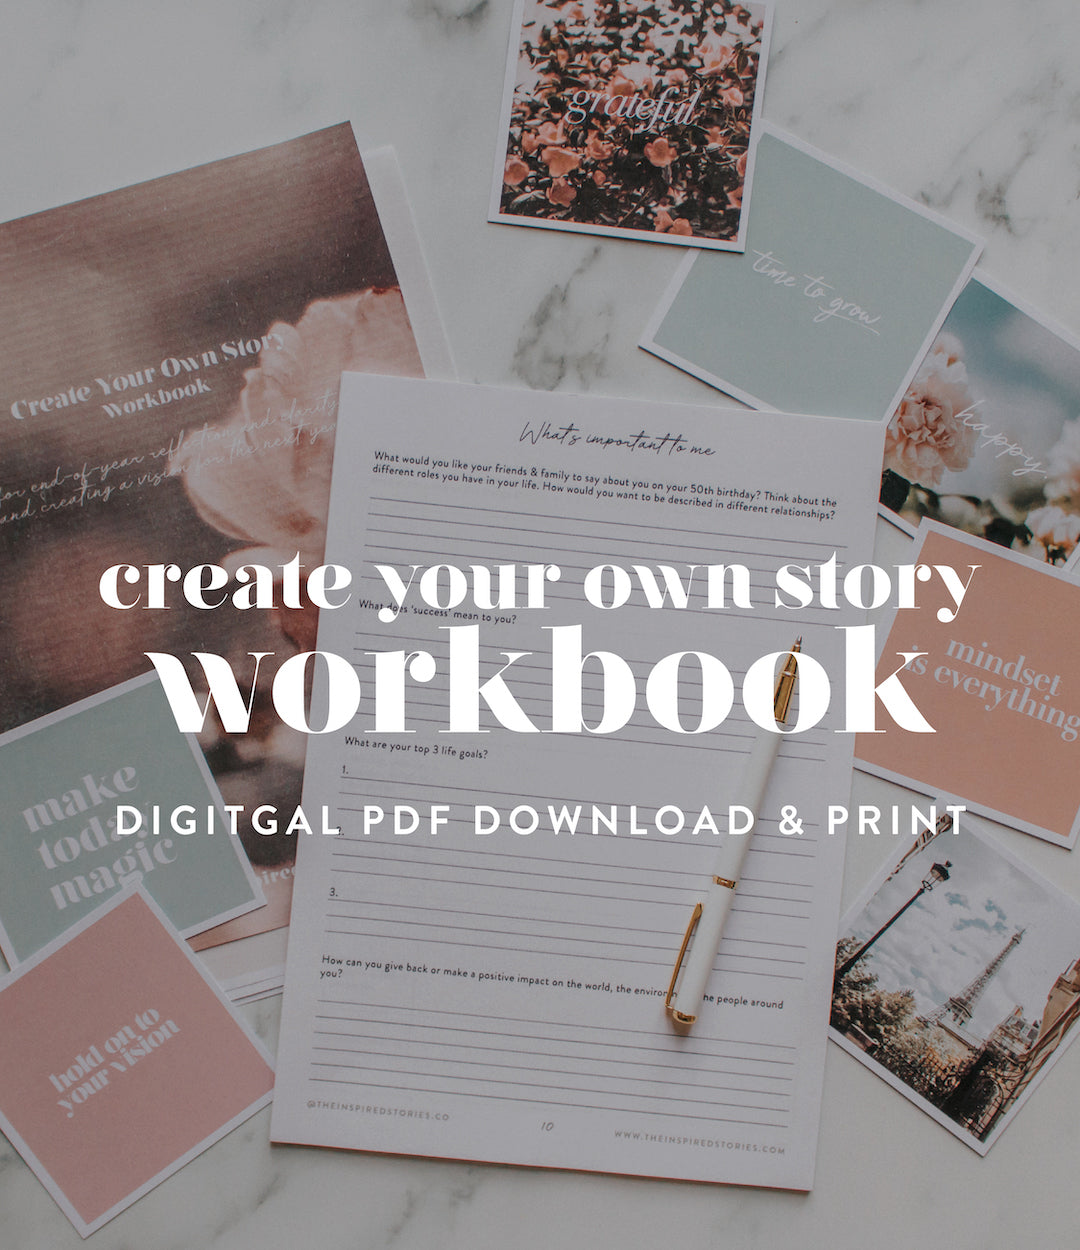 Digital Workbook: Create Your Own Story - Download